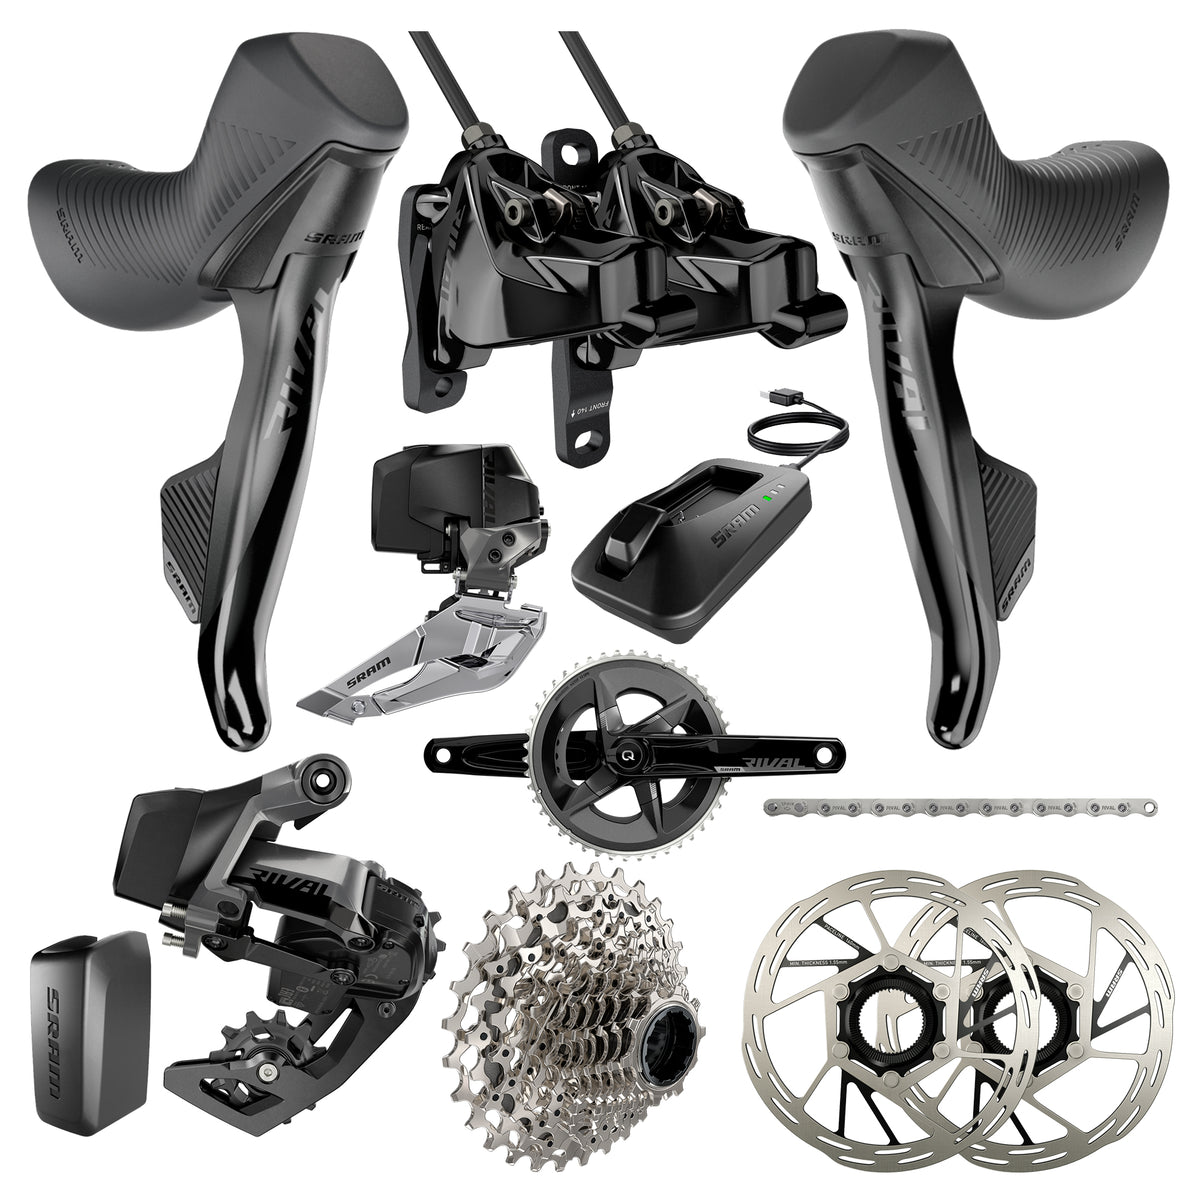 Sram Rival Axs Complete Groupset W/Power Meter